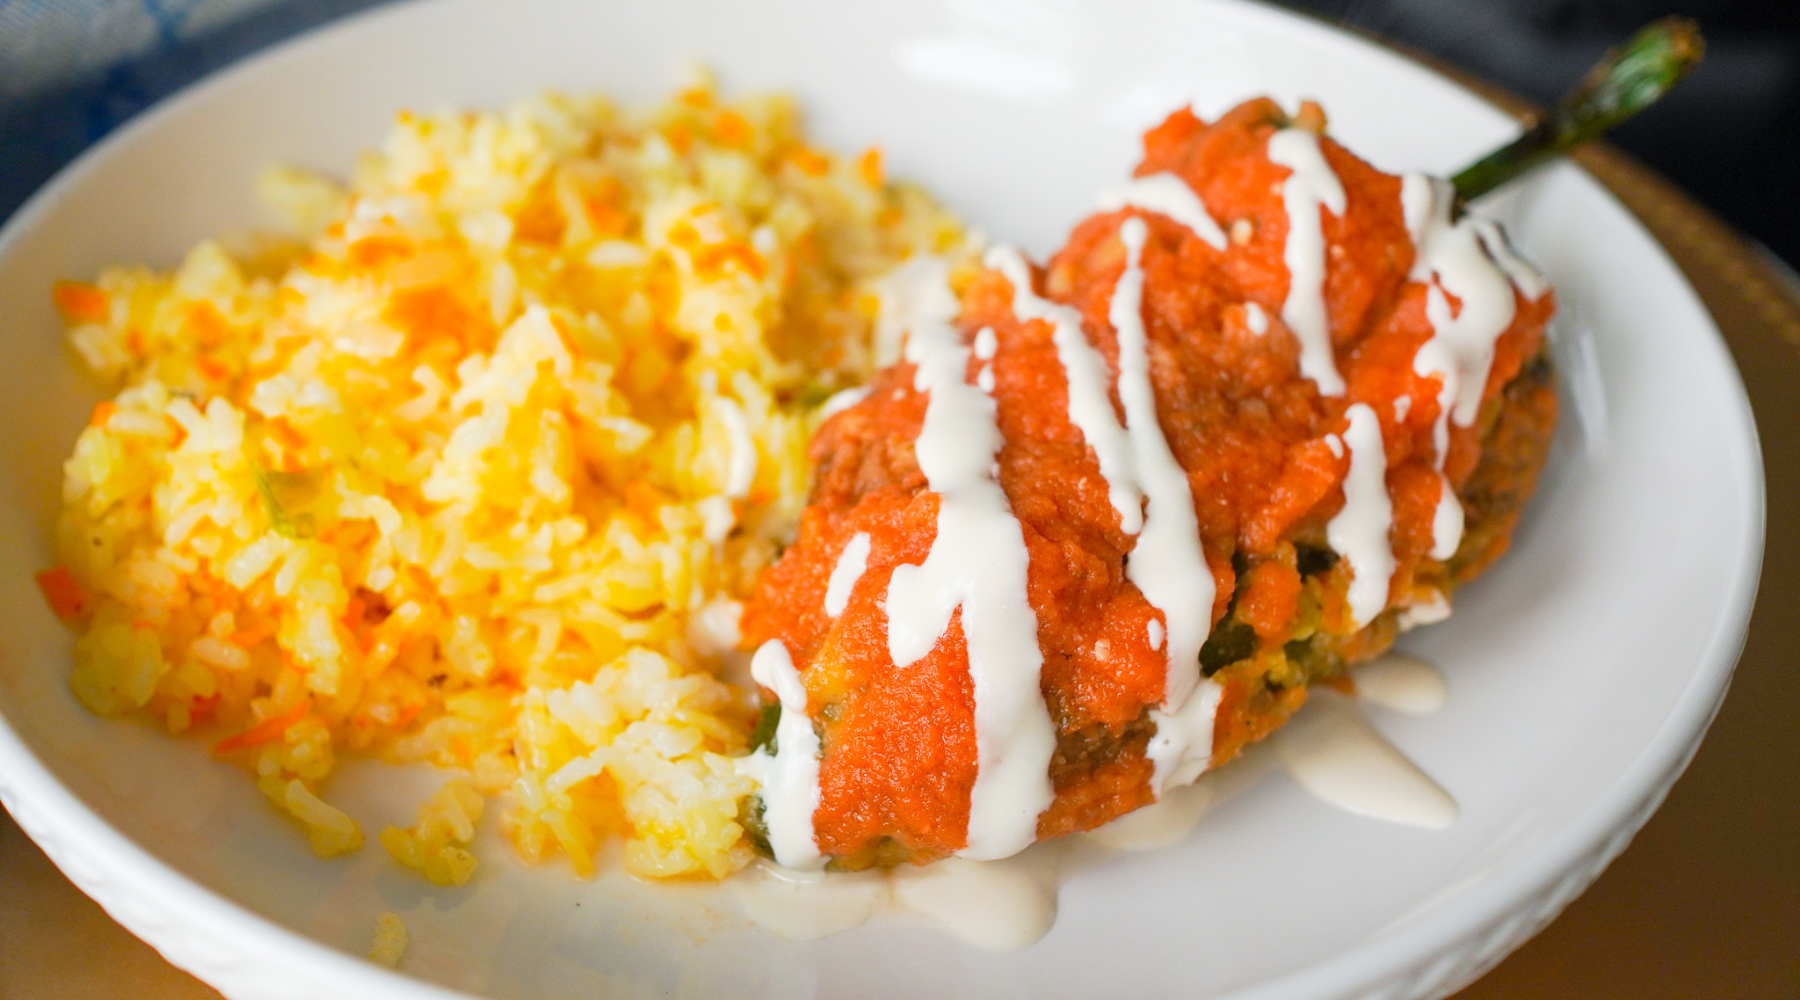 Charred Vegan Chiles Rellenos With Queso Fresco